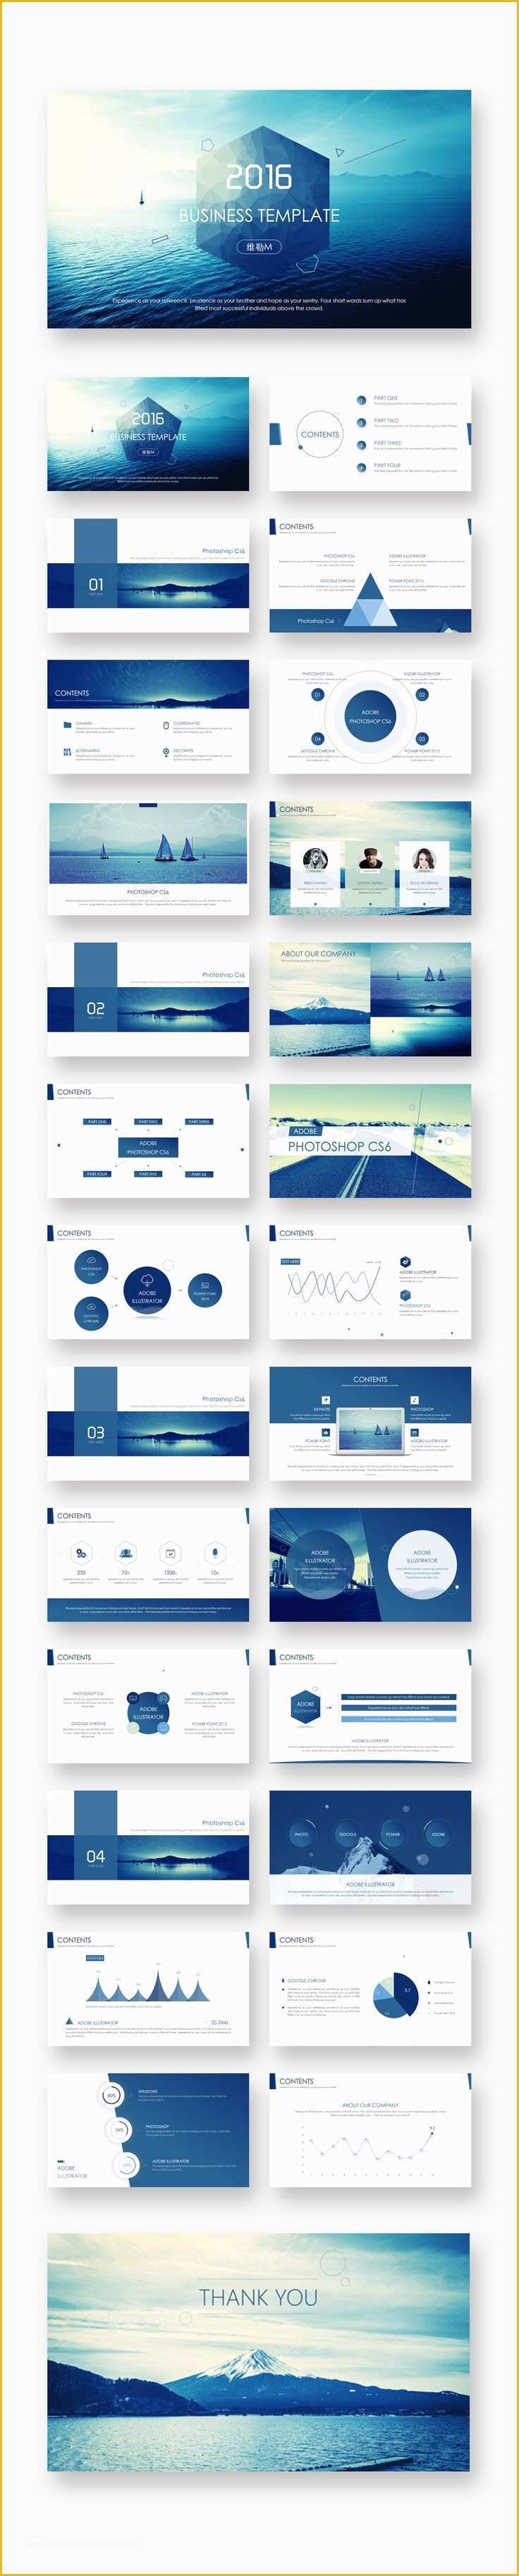 Premiere Pro Slideshow Template Free Download Of Best 25 Power Point Templates Ideas On Pinterest